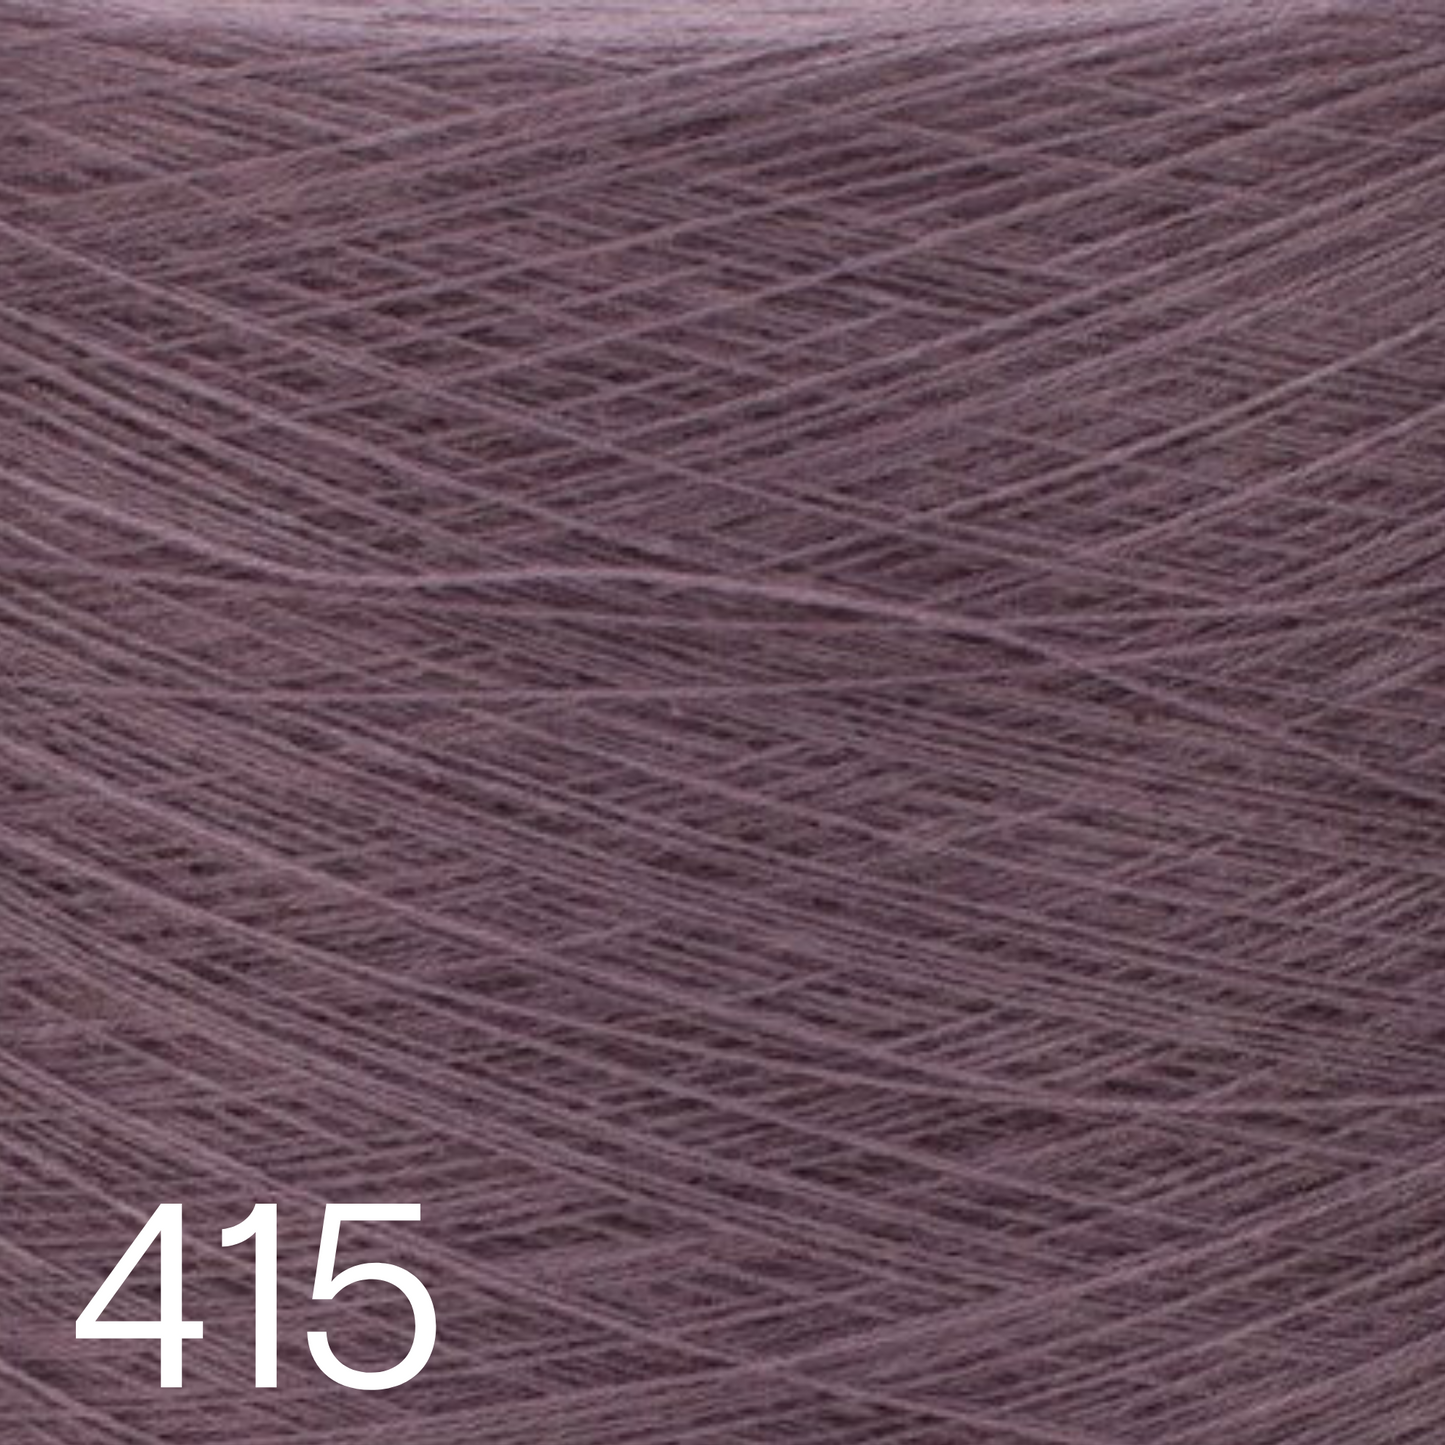 415 - Solid Colour Yarn Cake